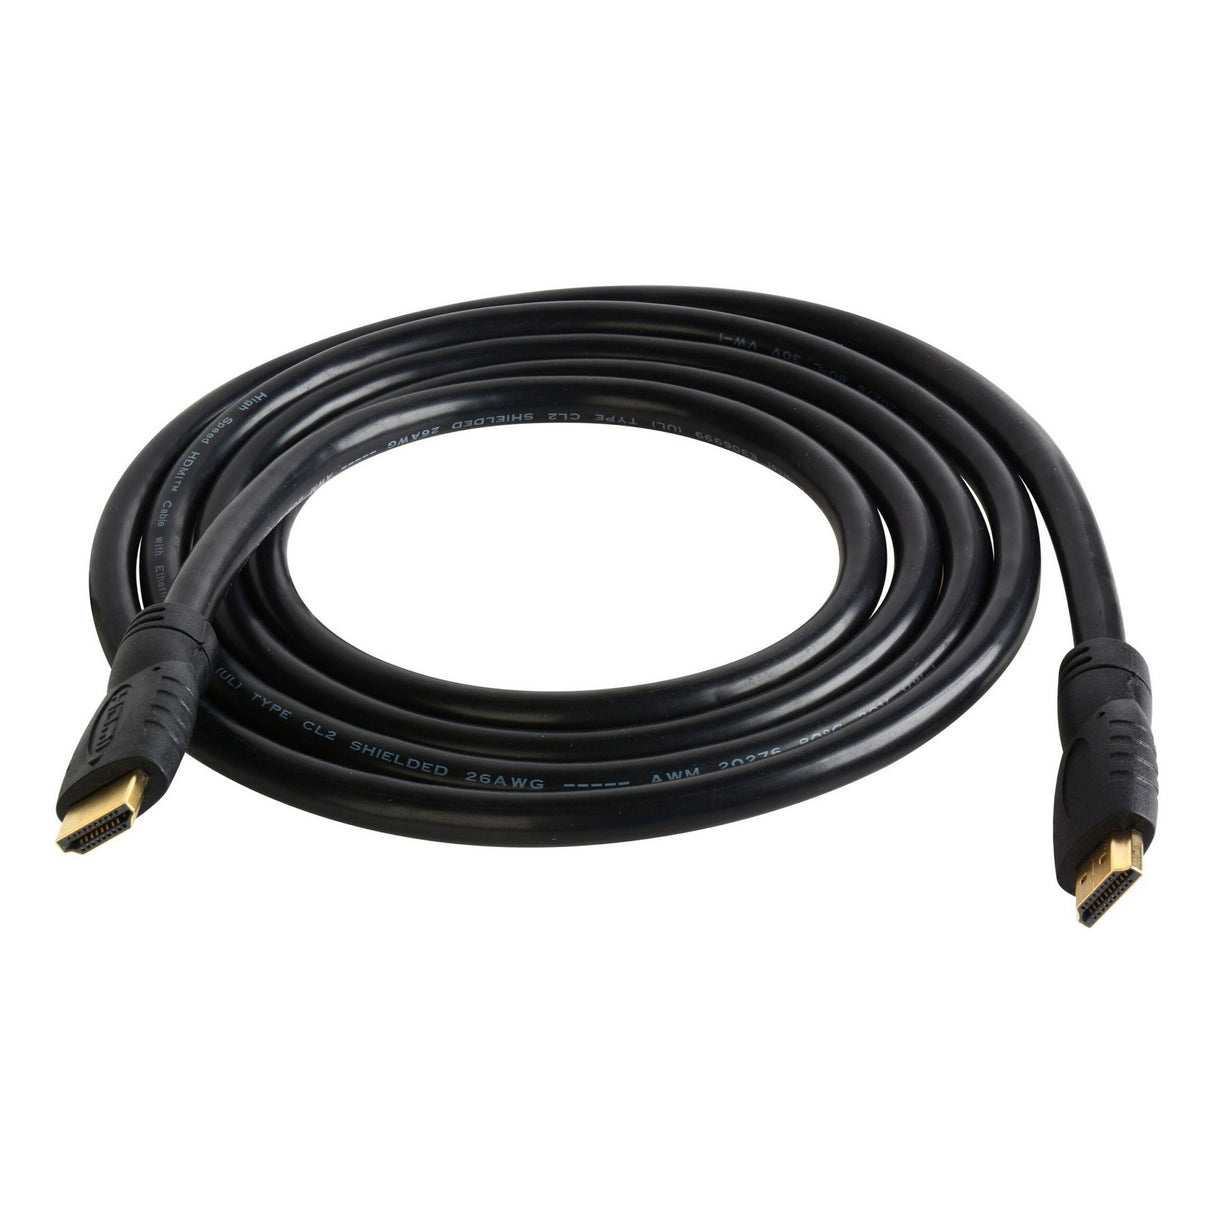 Connectronics HDMI-20-01 18G High Speed Ethernet 4K/60Hz 4:4:4 Male to Male HDMI 2.0 Cable, 3 Foot